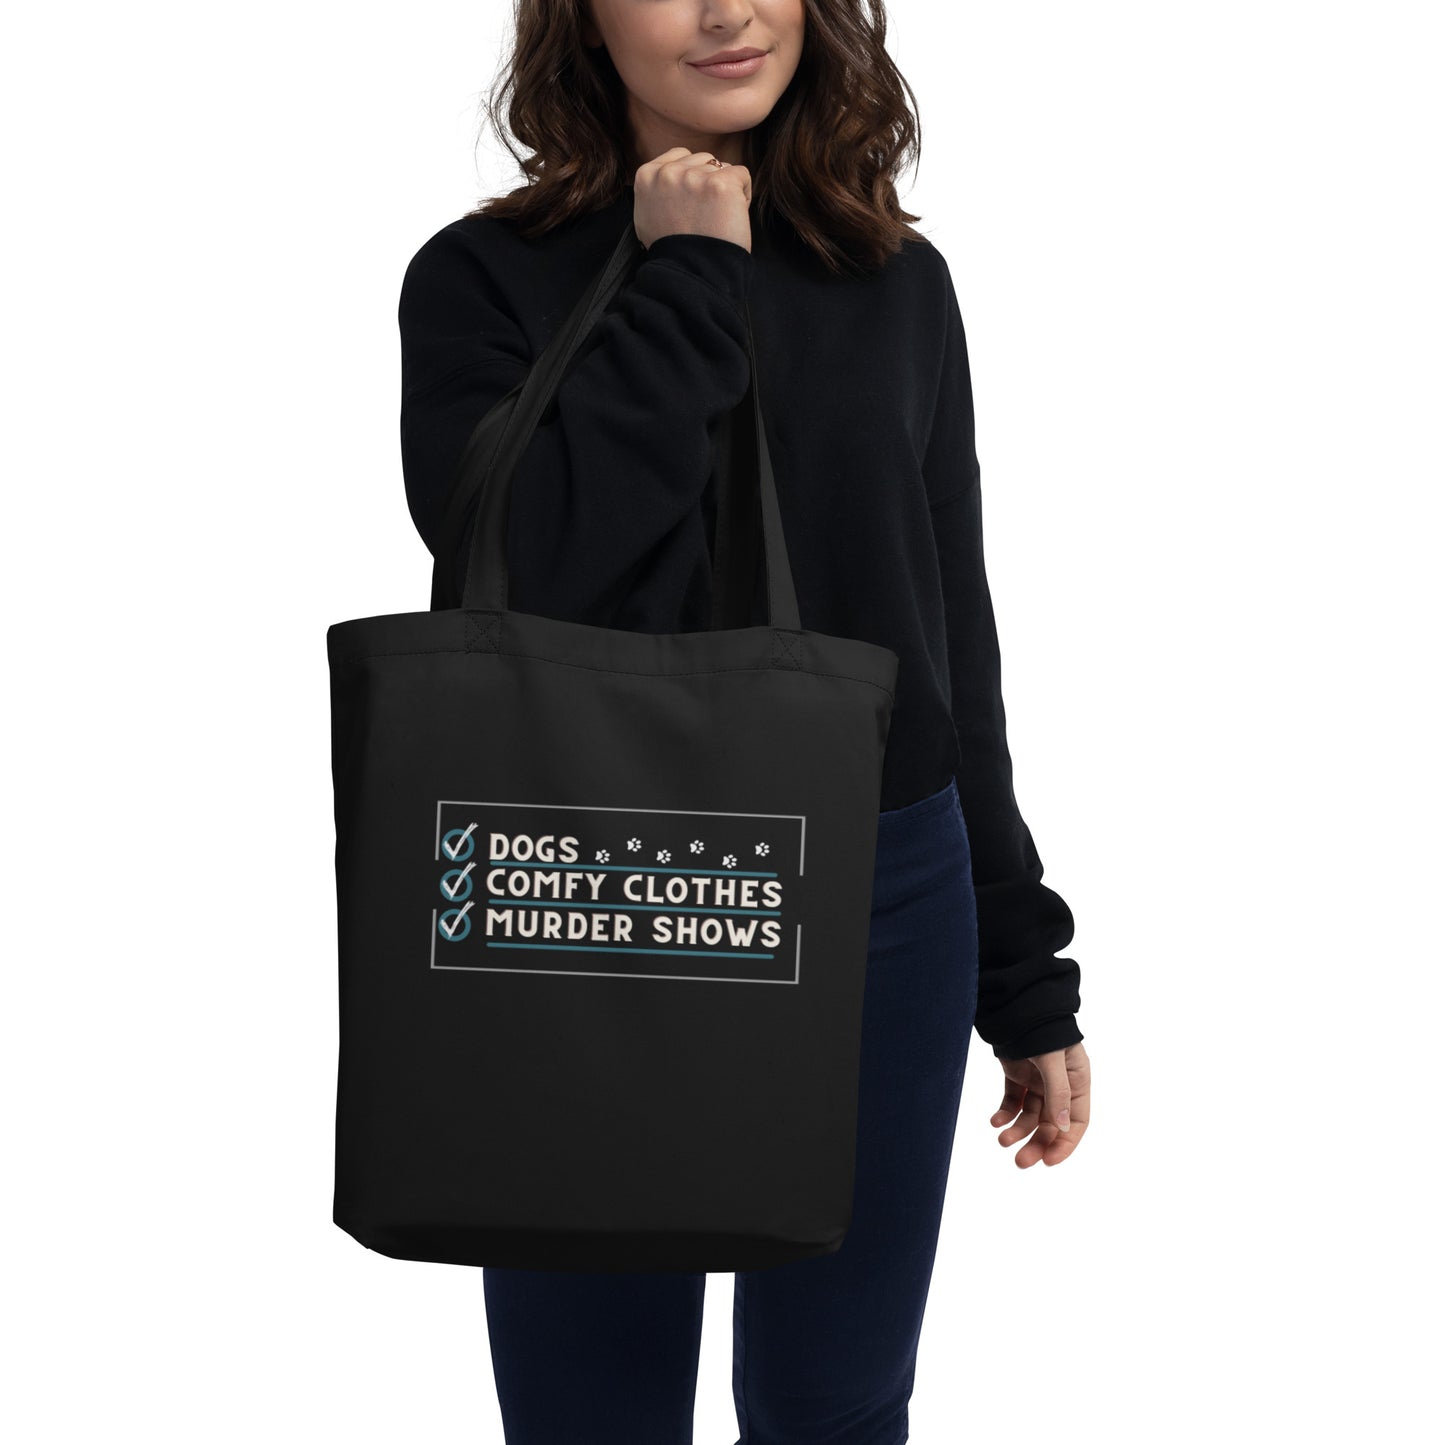 Dogs, Comfy clothes, murder shows Eco Tote Bag